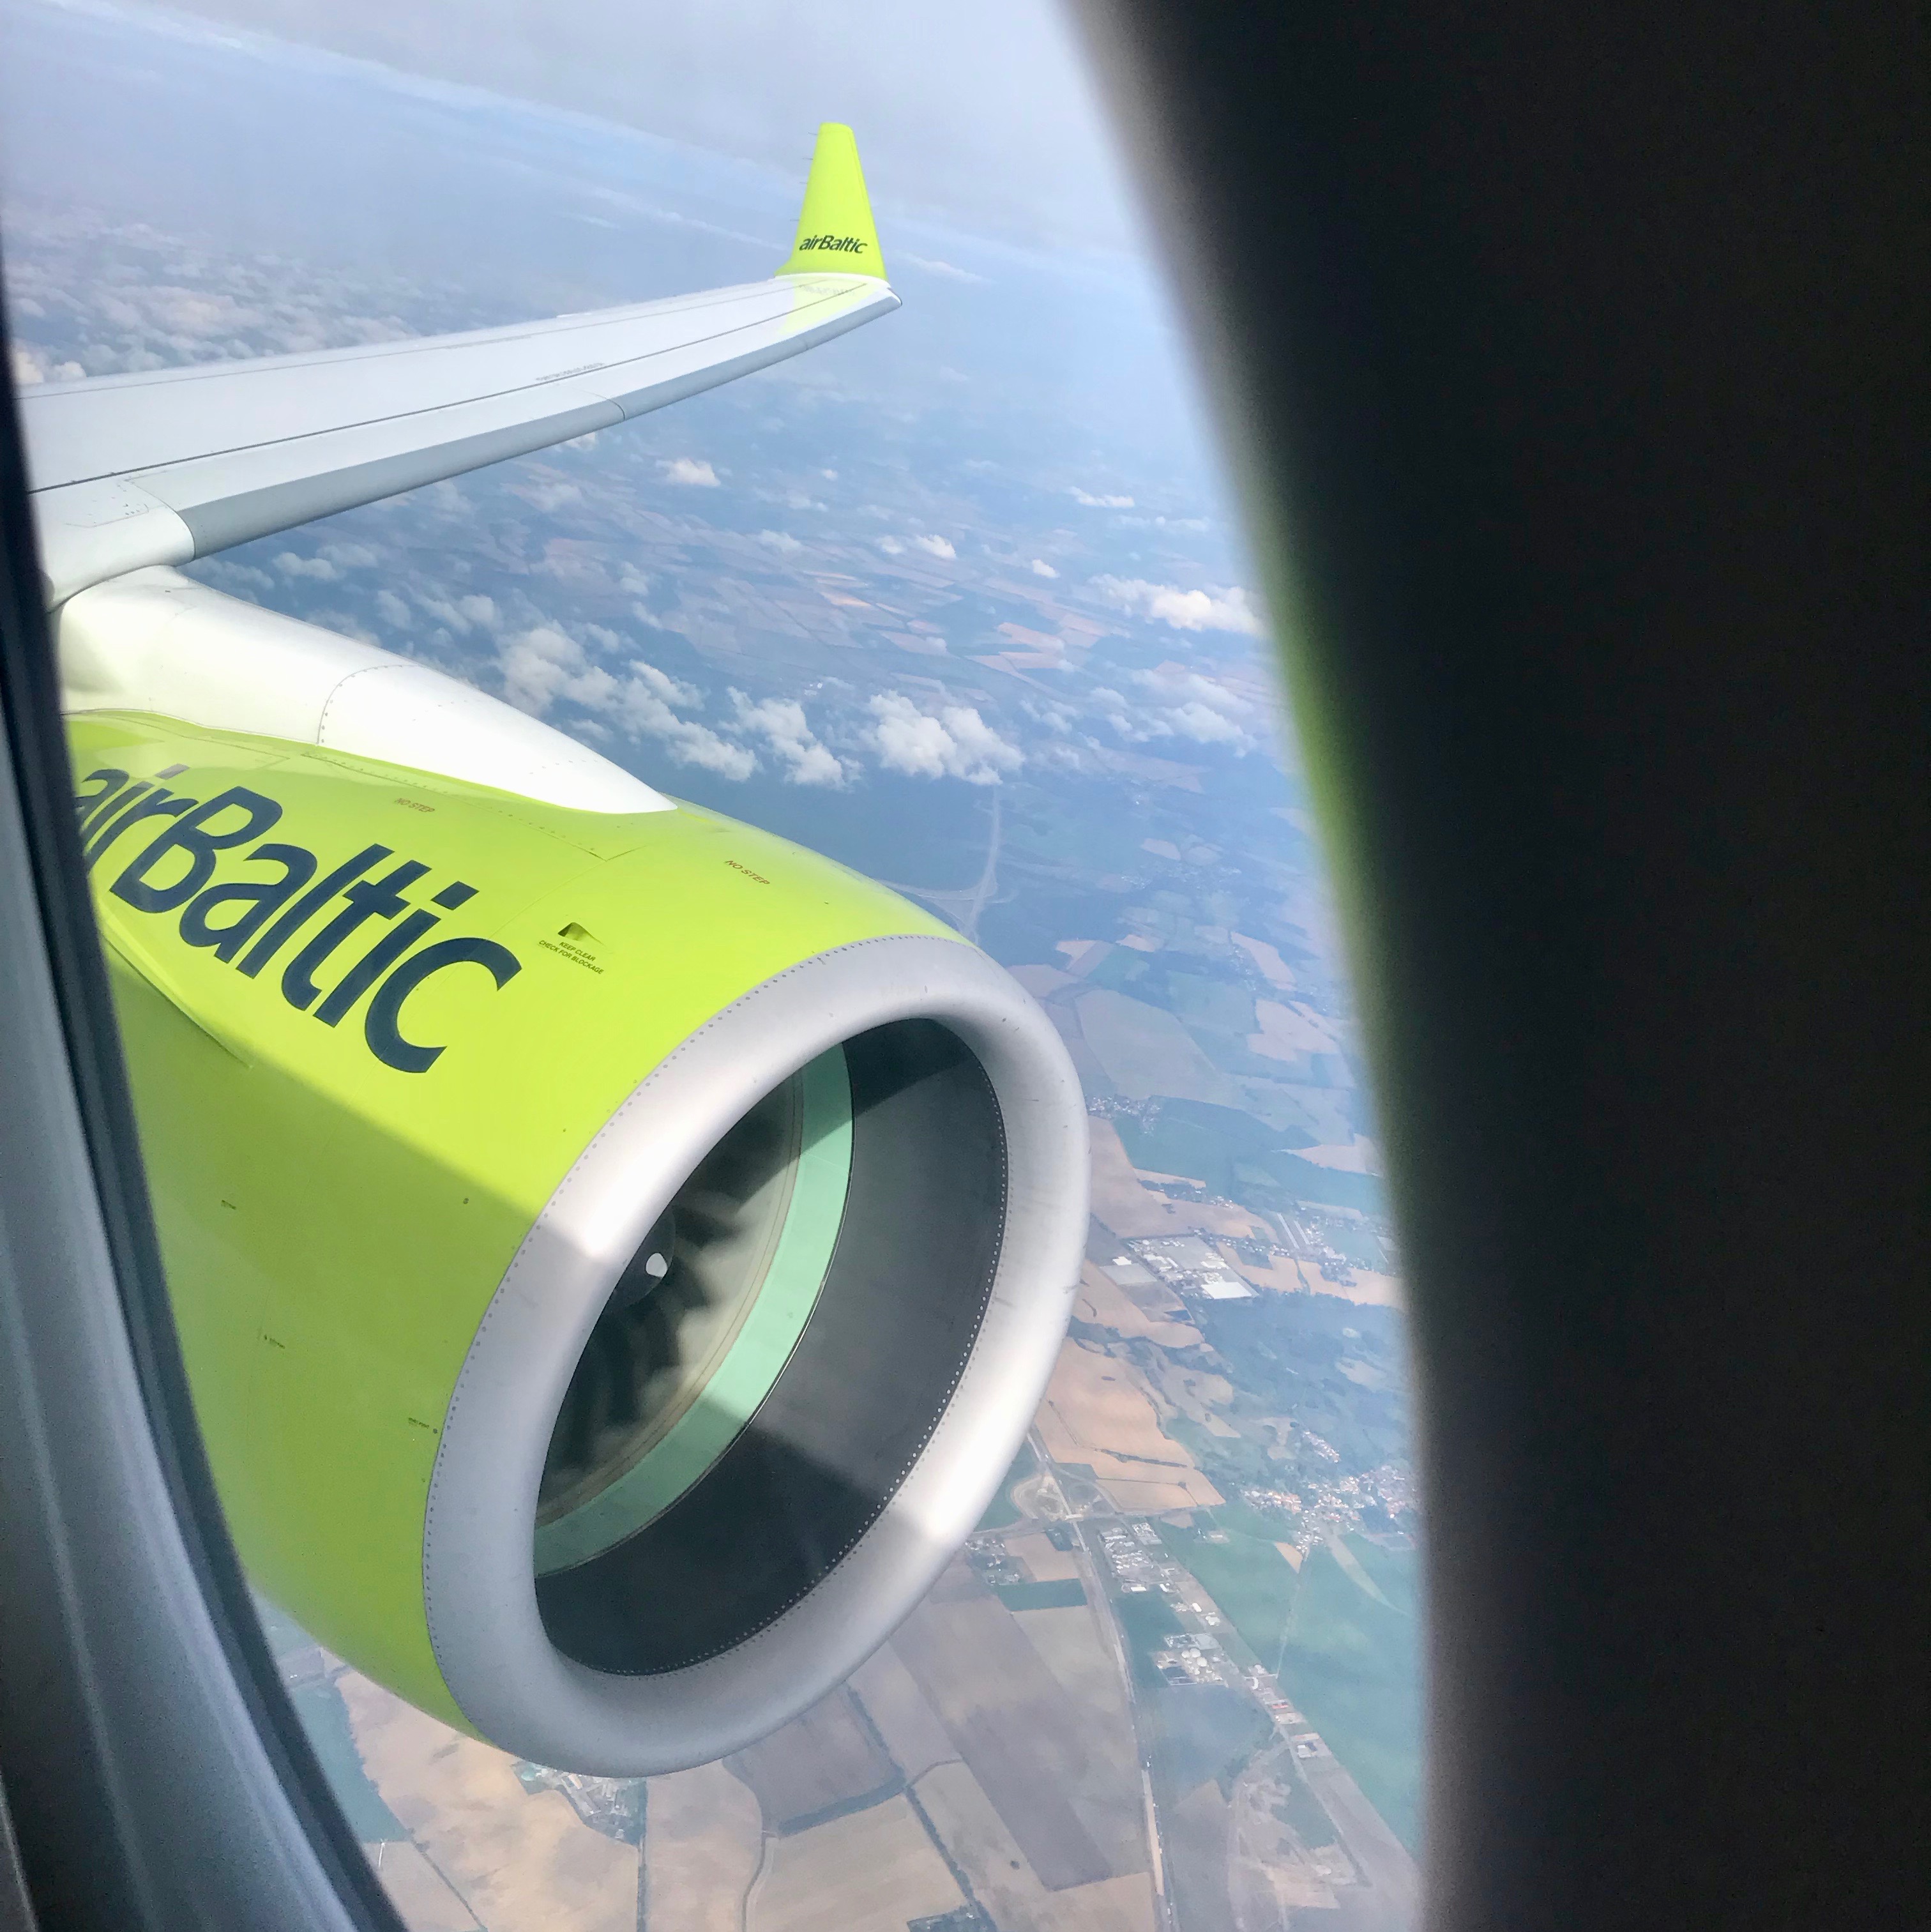 A view out the window of an airBaltic Airbus A220 shows a bright green engine with the airline logo prominently displayed while a green wing tip pops up.  The jet is flying high above the clouds. 